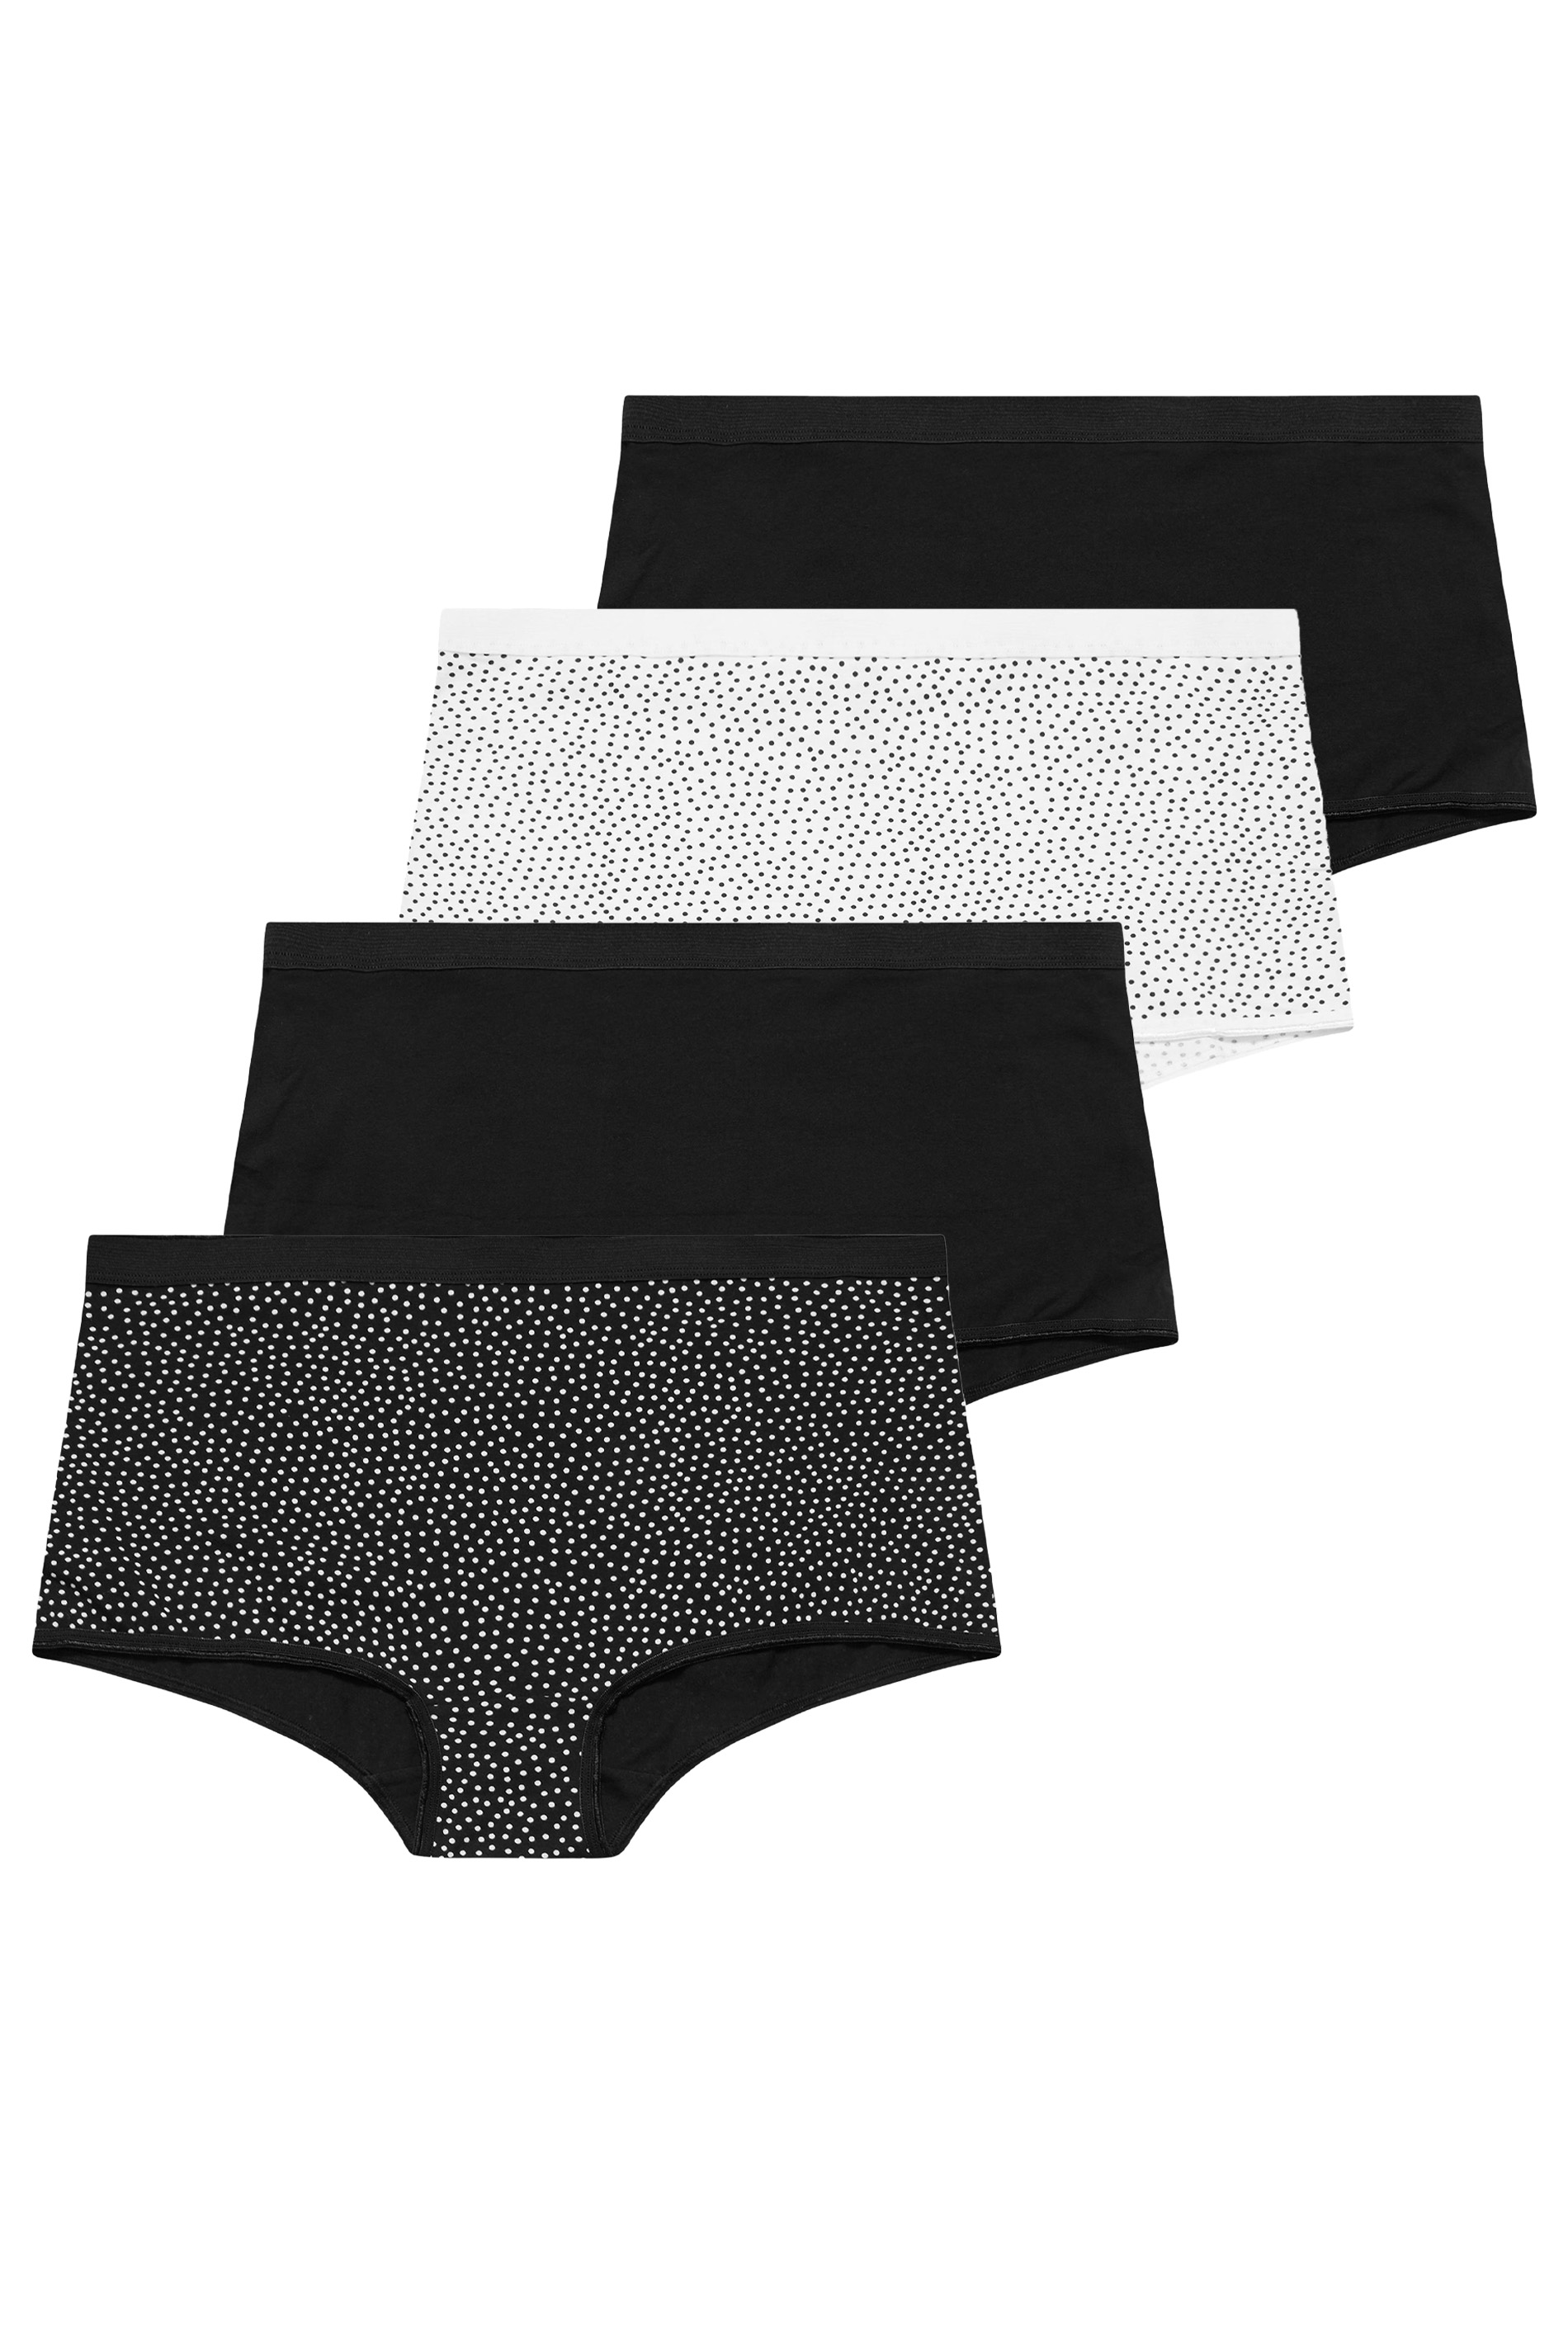 YOURS 4 PACK Plus Size Black Spot Print Cotton Stretch Shorts | Yours Clothing 3